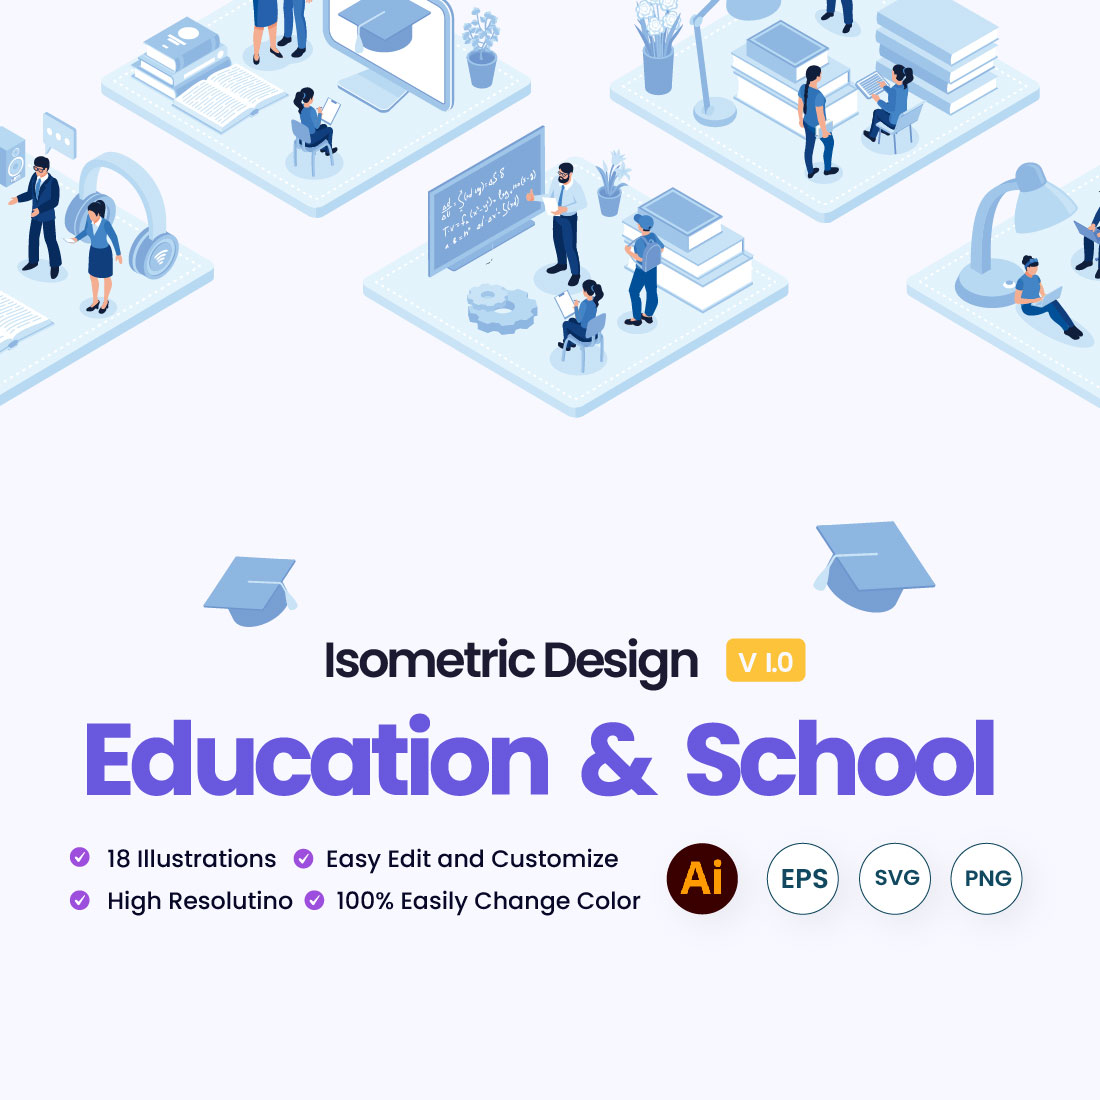 18 Education-Related Illustrations for Presentations, Web, & App cover image.